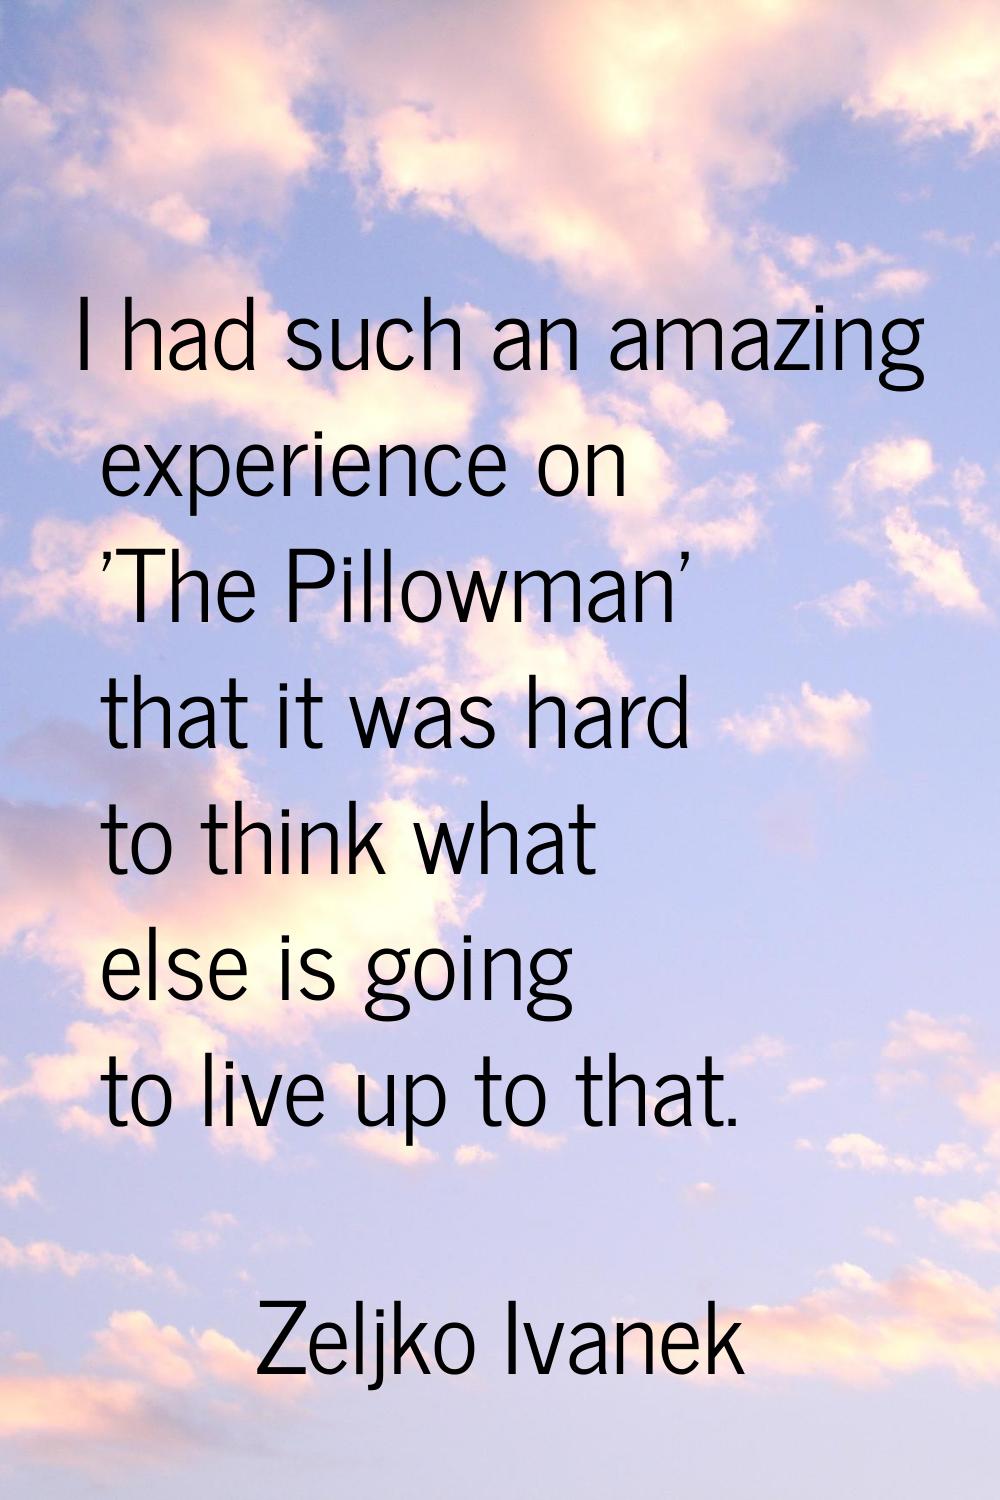 I had such an amazing experience on 'The Pillowman' that it was hard to think what else is going to